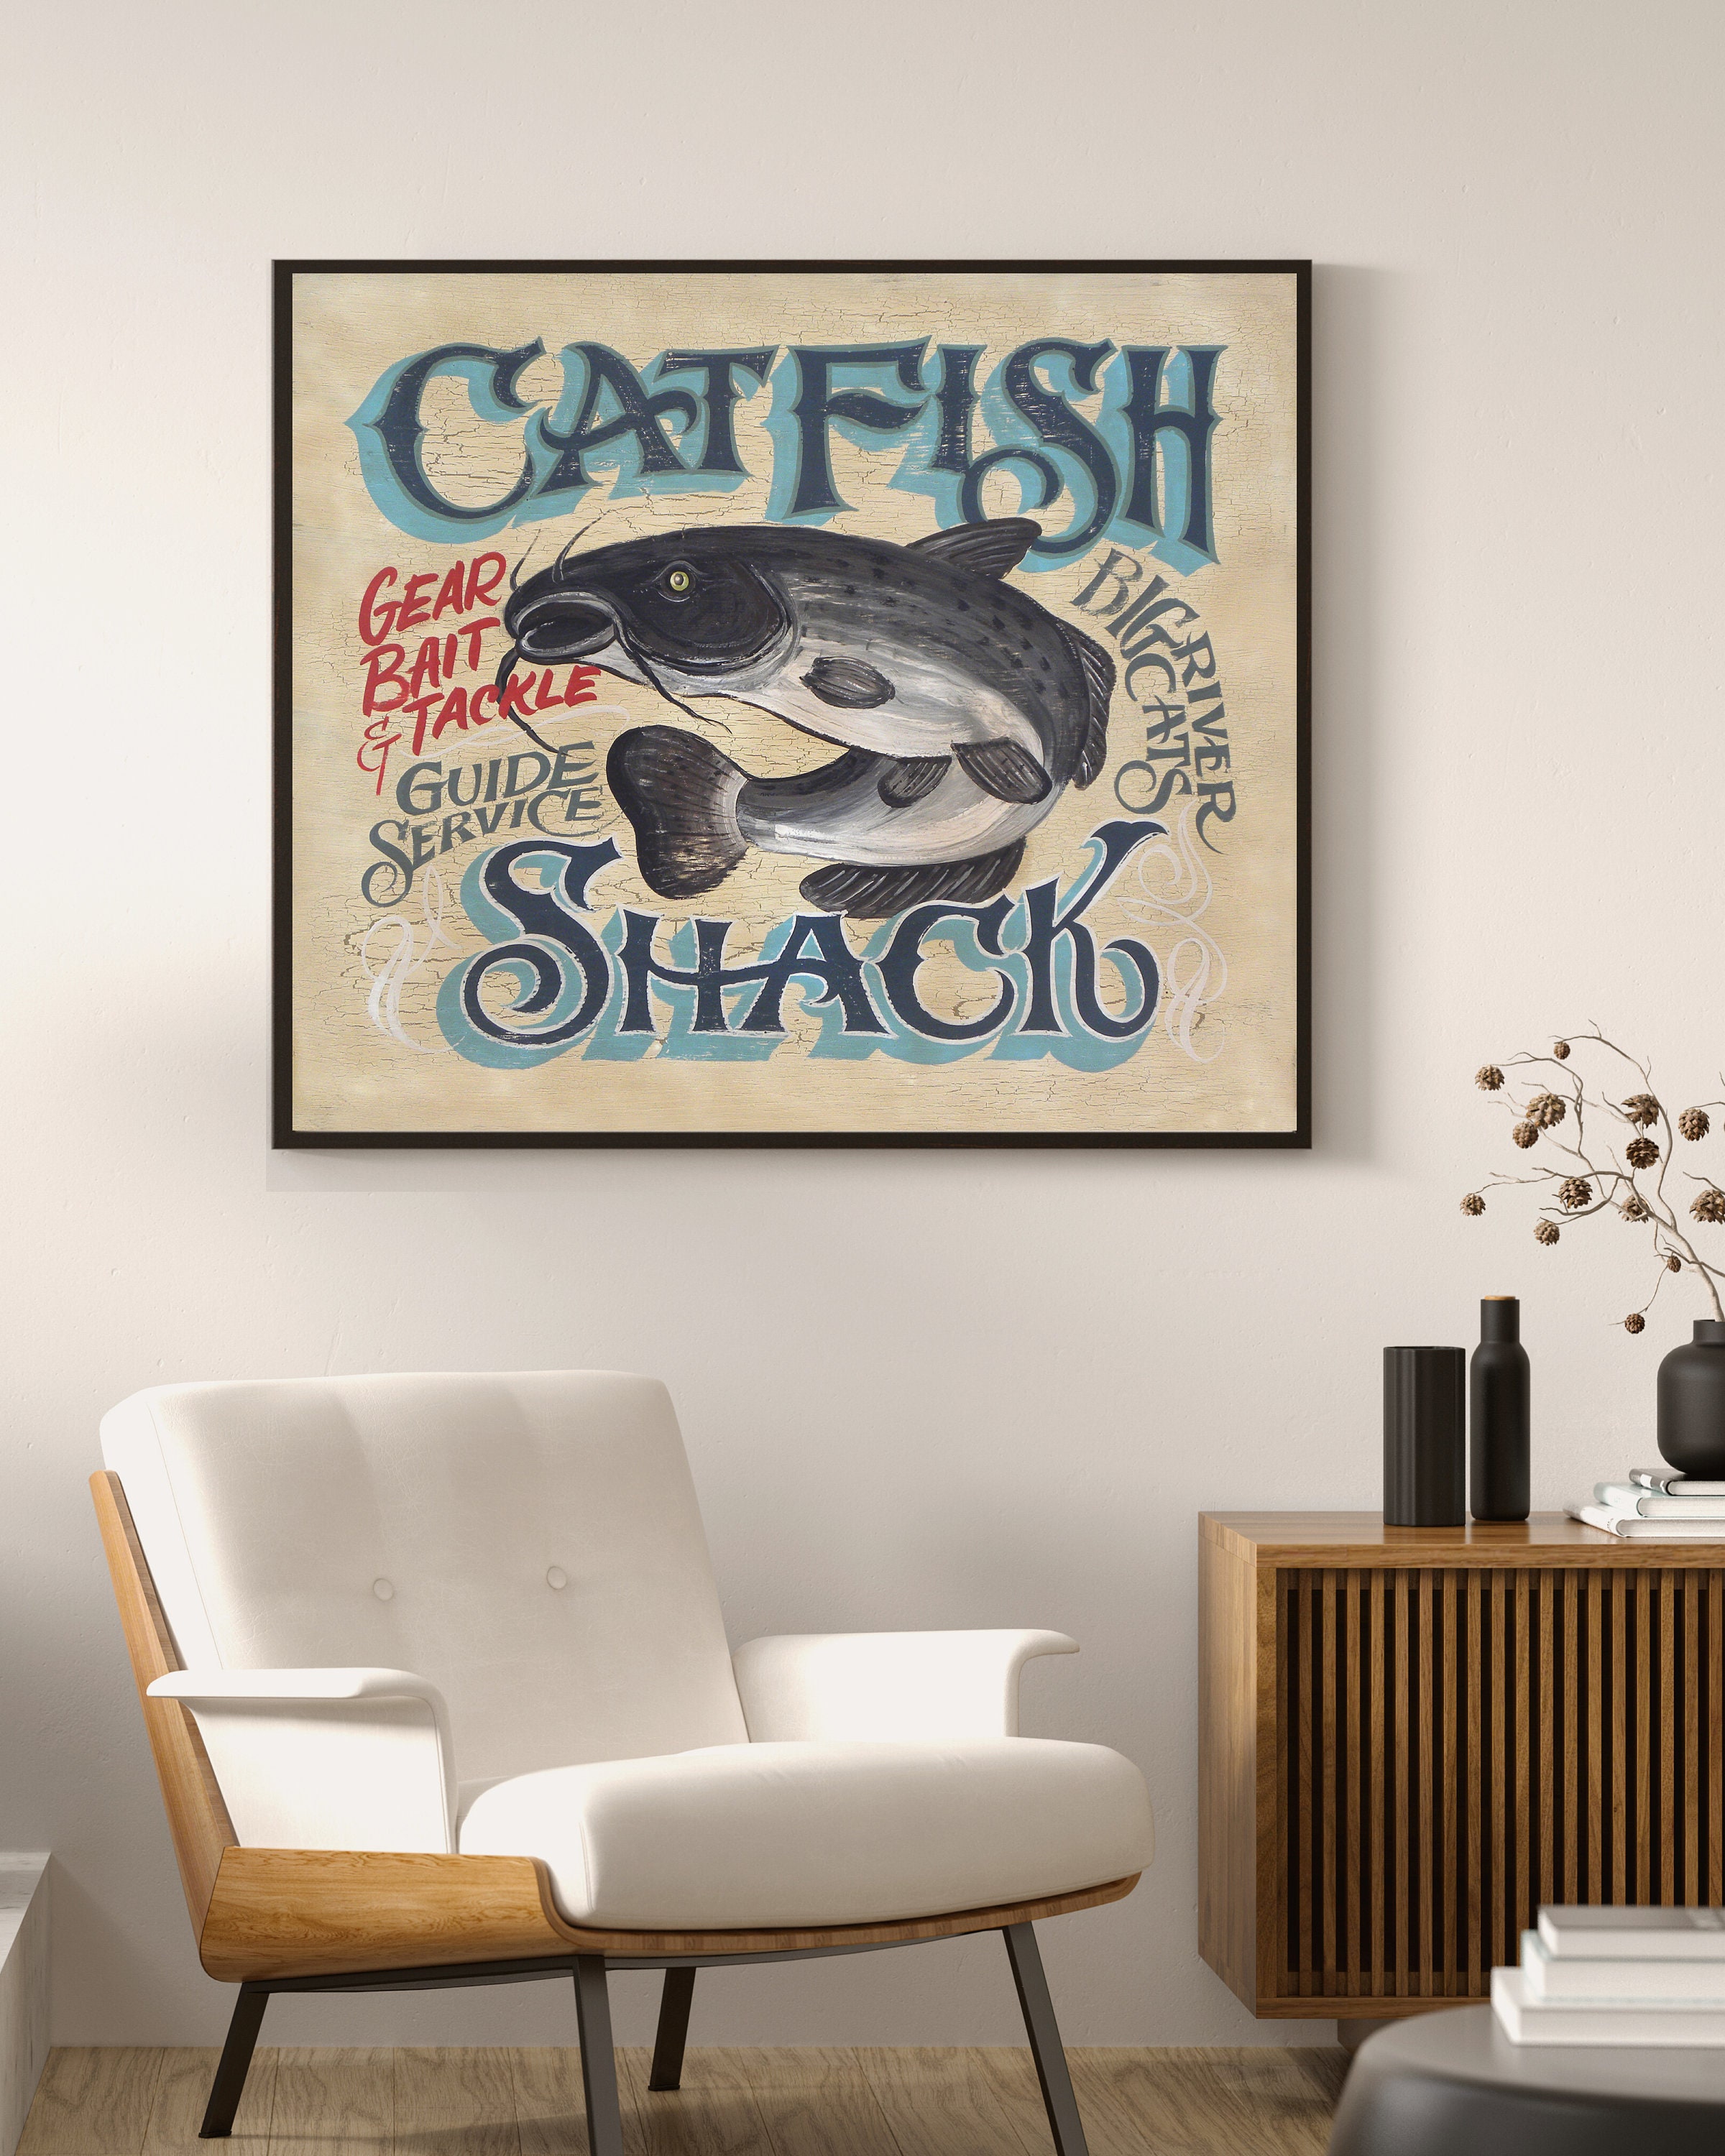 Catfish Shack Fishing Print From an Original Hand Painted and Lettered Sign  Fishing Art Man-cave Decor Seafood Art Seafood Wall Art 